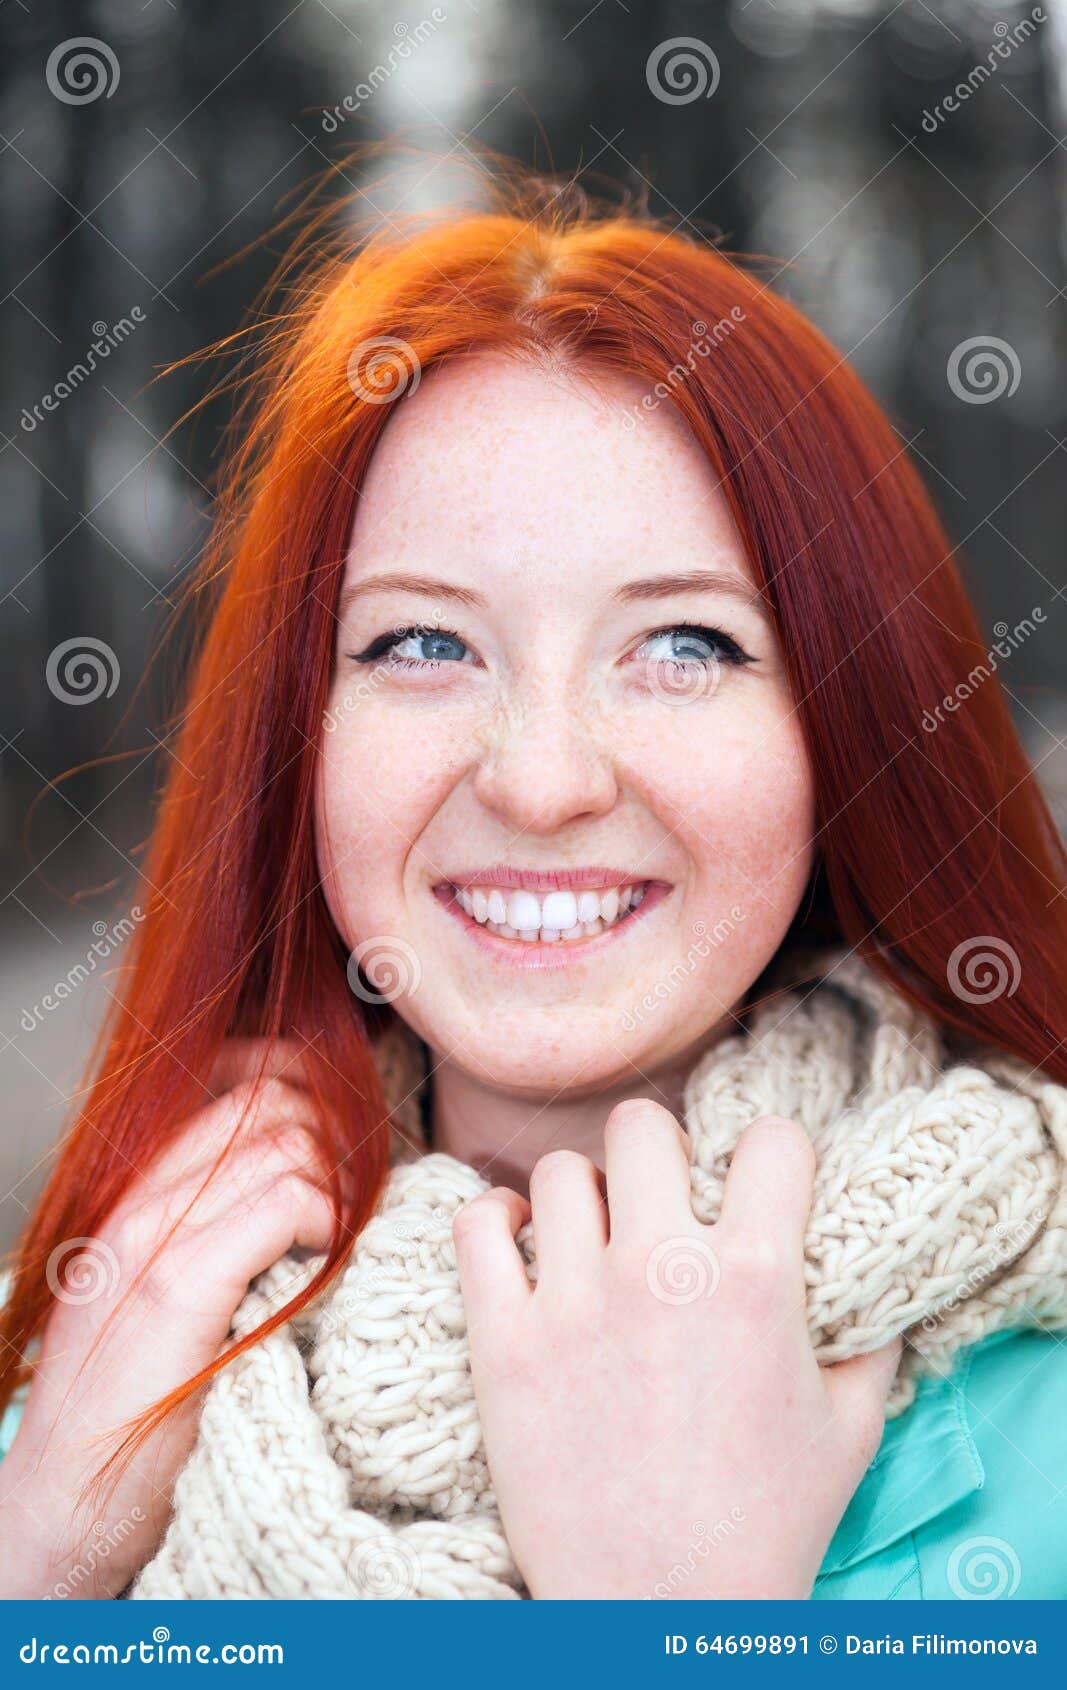 Red Haired Girl In Spring Day Stock Image Image Of Pretty Outdoors 64699891